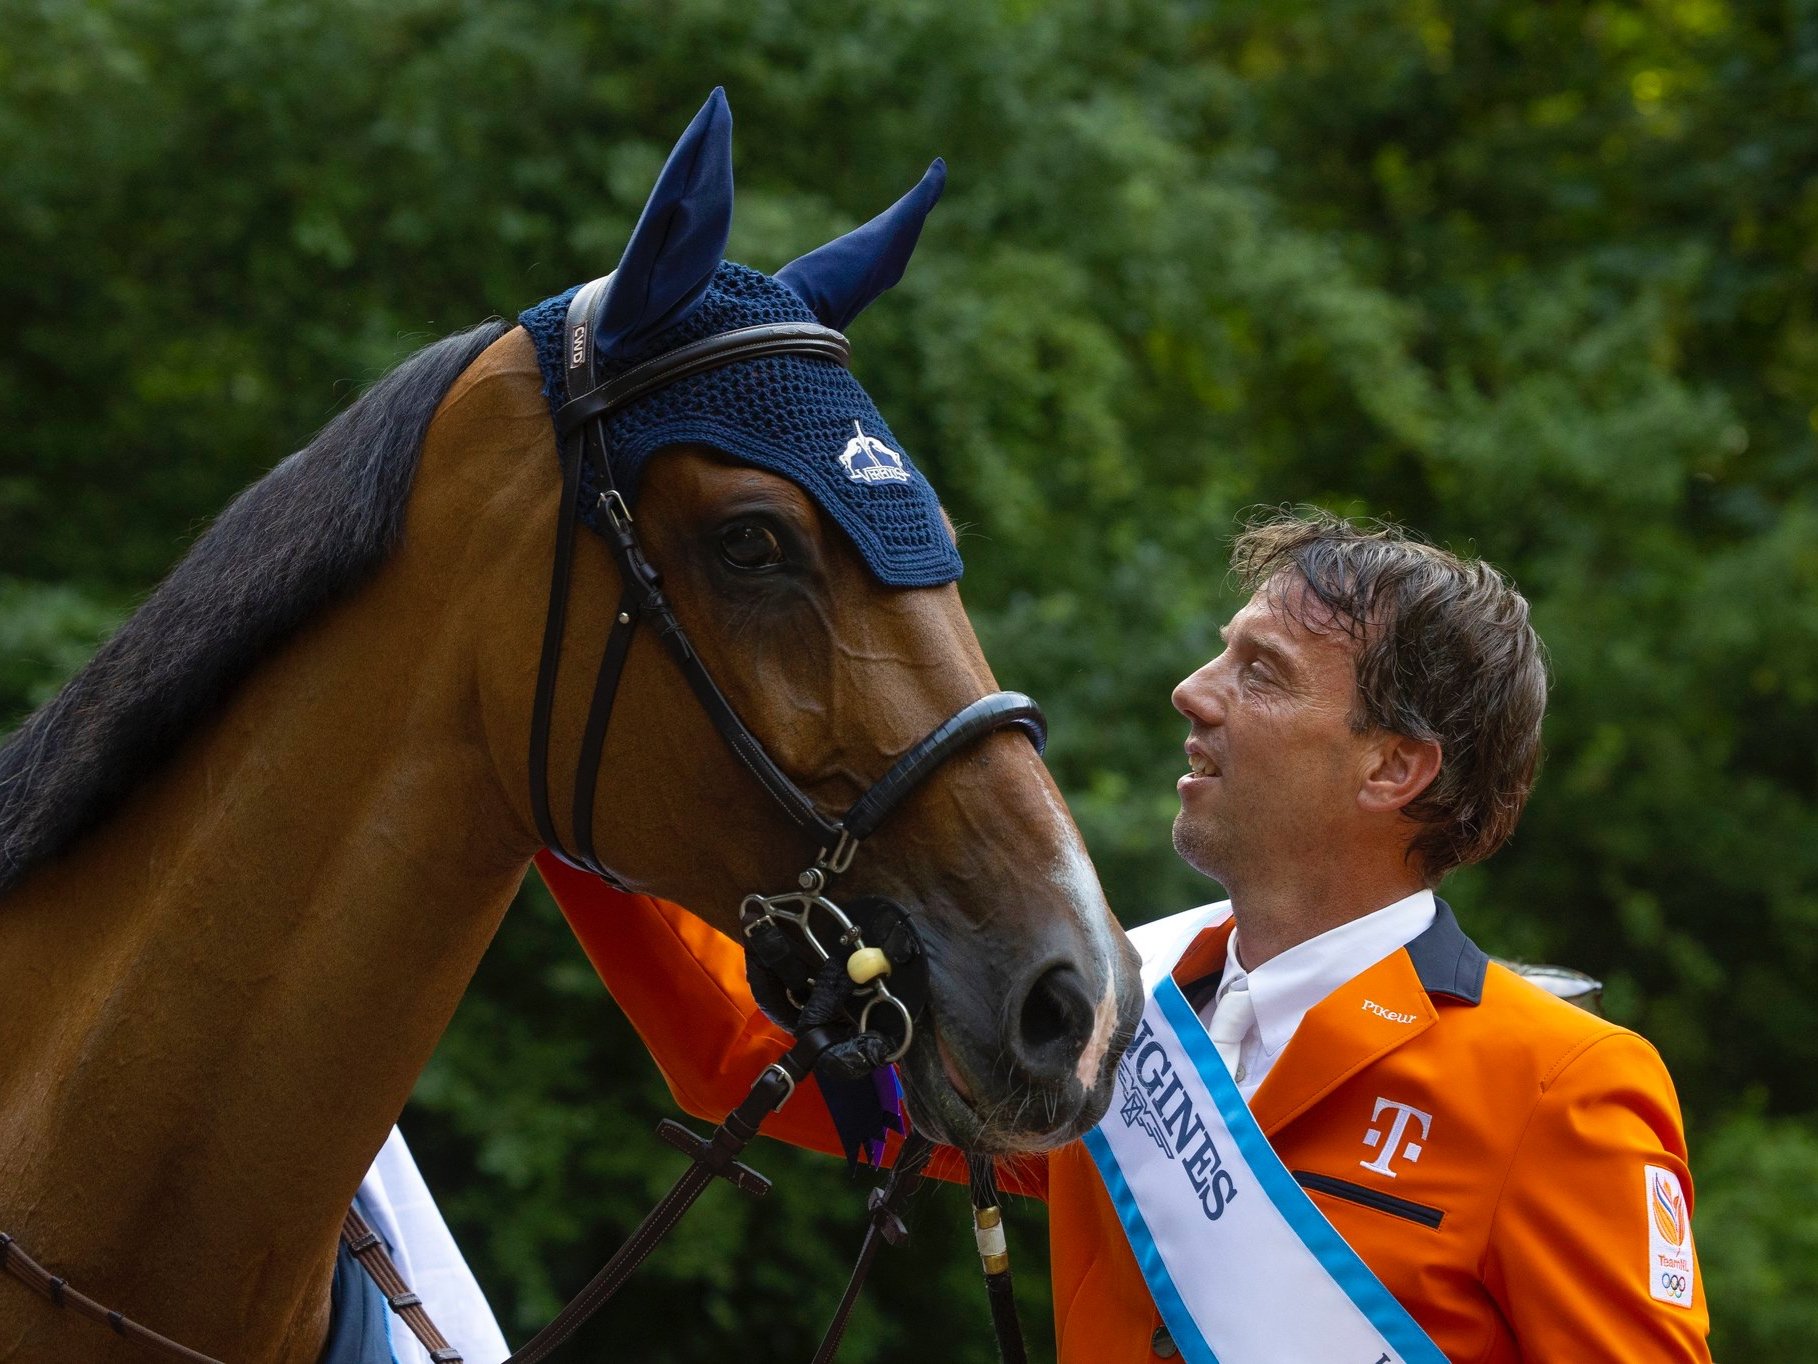  Harrie Smolders &amp; Monaco celebrating a 1st place finish with The Dutch team at the 2023 Longines FEI Jumping Nations Cup of The Netherlands. 